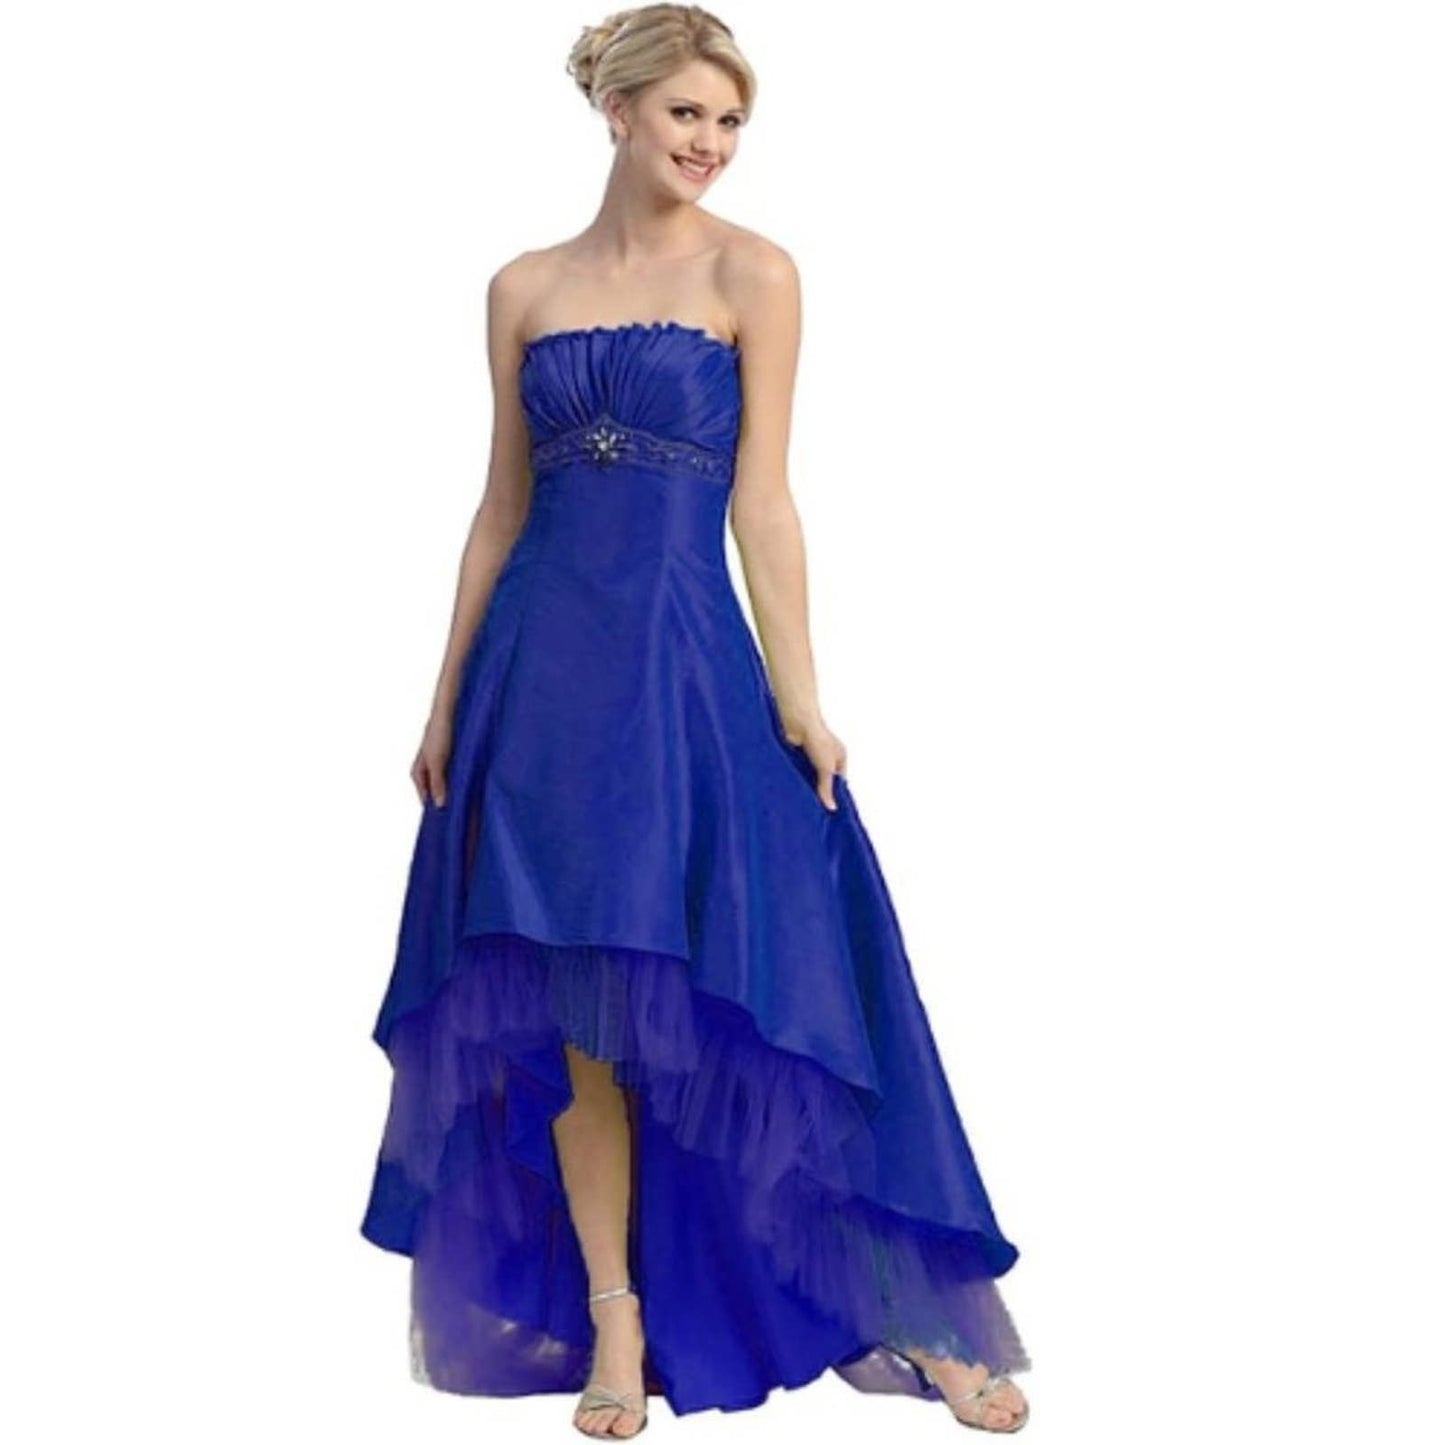 Mayqueen Royal Blue Strapless Prom  Dress NWT Size 6